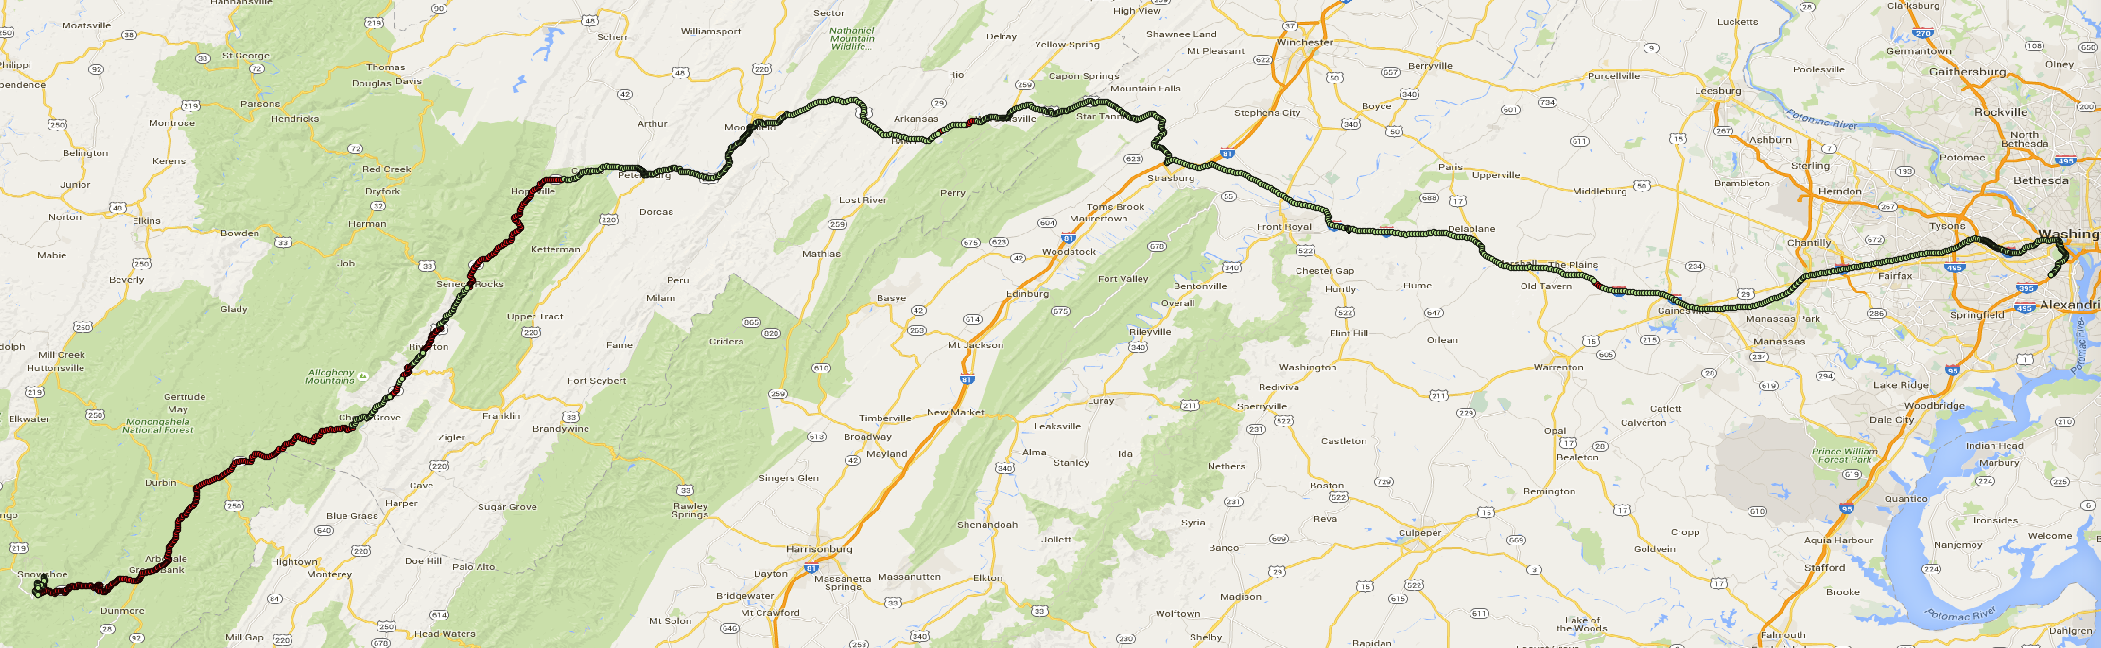 Complete route from DC to Snowshoe, WV with AT&T signal level